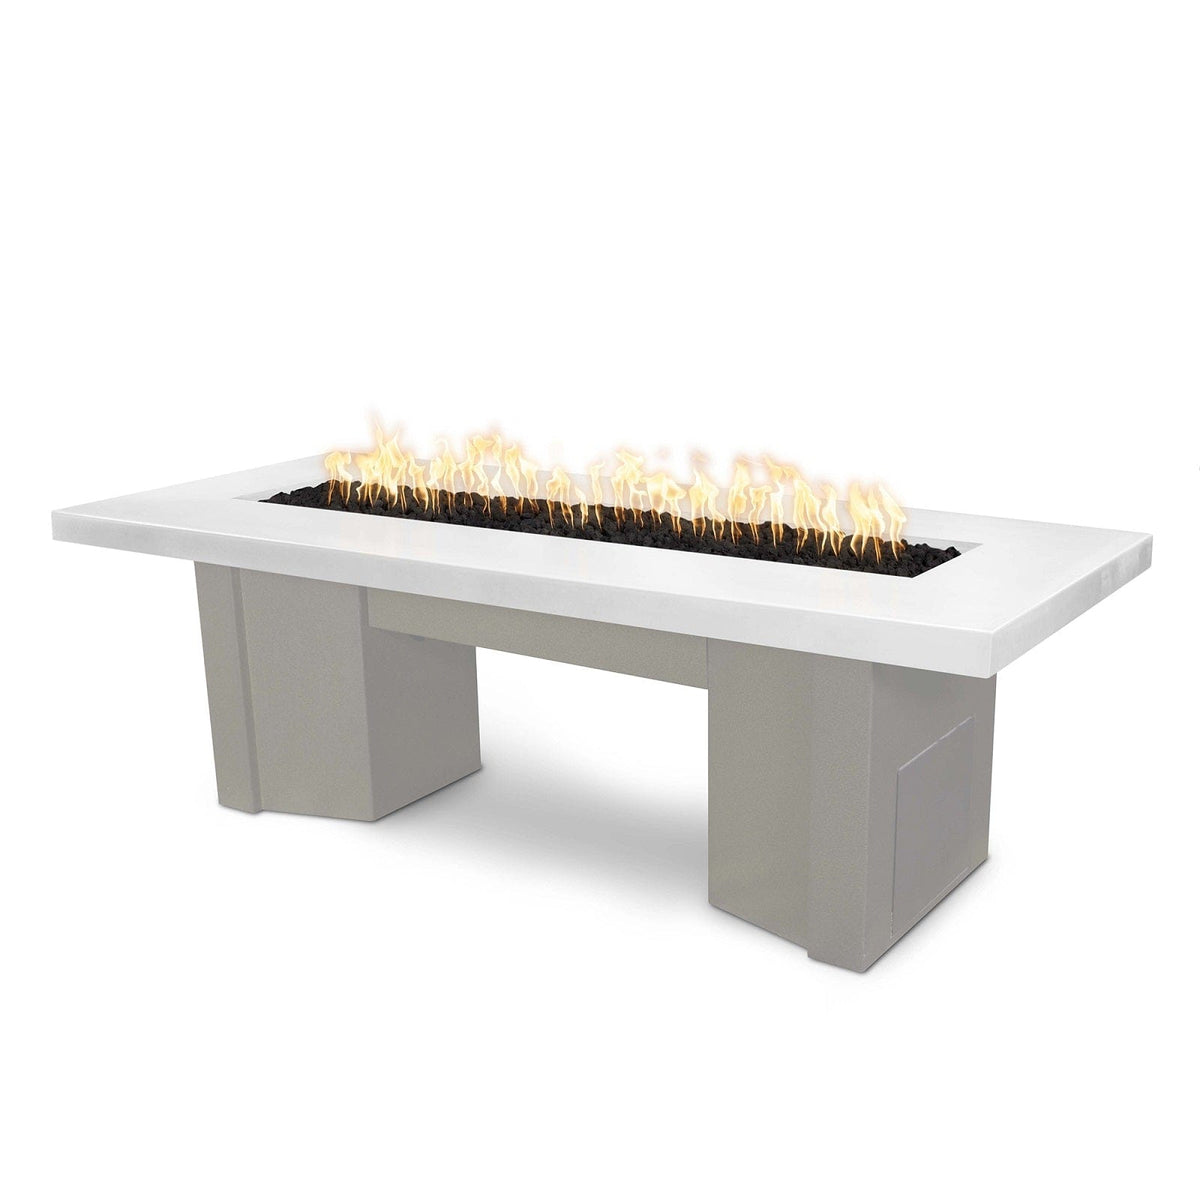 The Outdoor Plus Fire Features Limestone (-LIM) / Pewter Powder Coated Steel (-PEW) The Outdoor Plus 78&quot; Alameda Fire Table Smooth Concrete in Liquid Propane - Flame Sense System with Push Button Spark Igniter / OPT-ALMGFRC78FSEN-LP